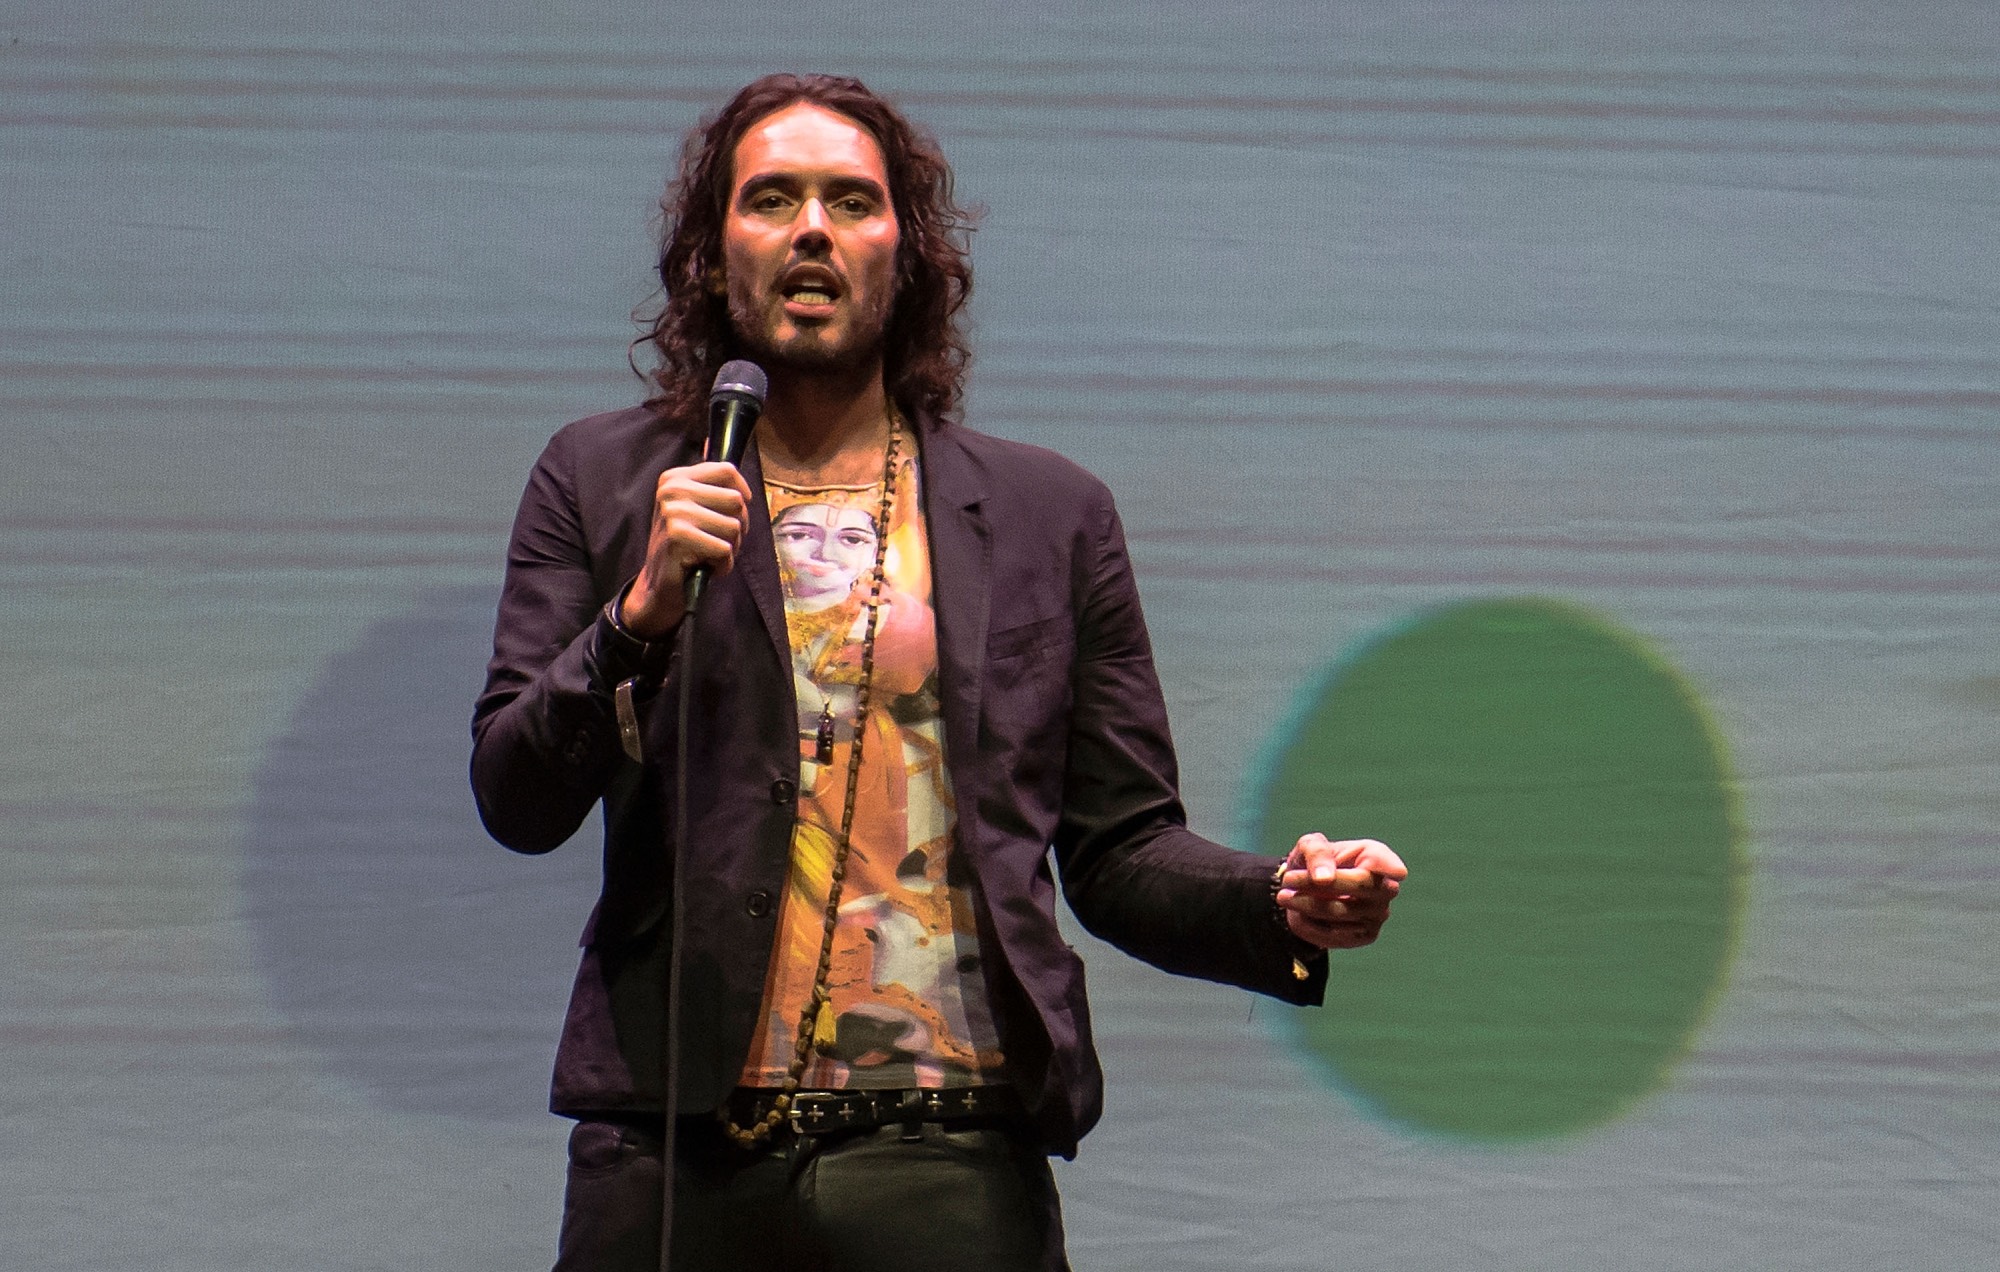 Russell Brand reportedly questioned by police over alleged assault allegations